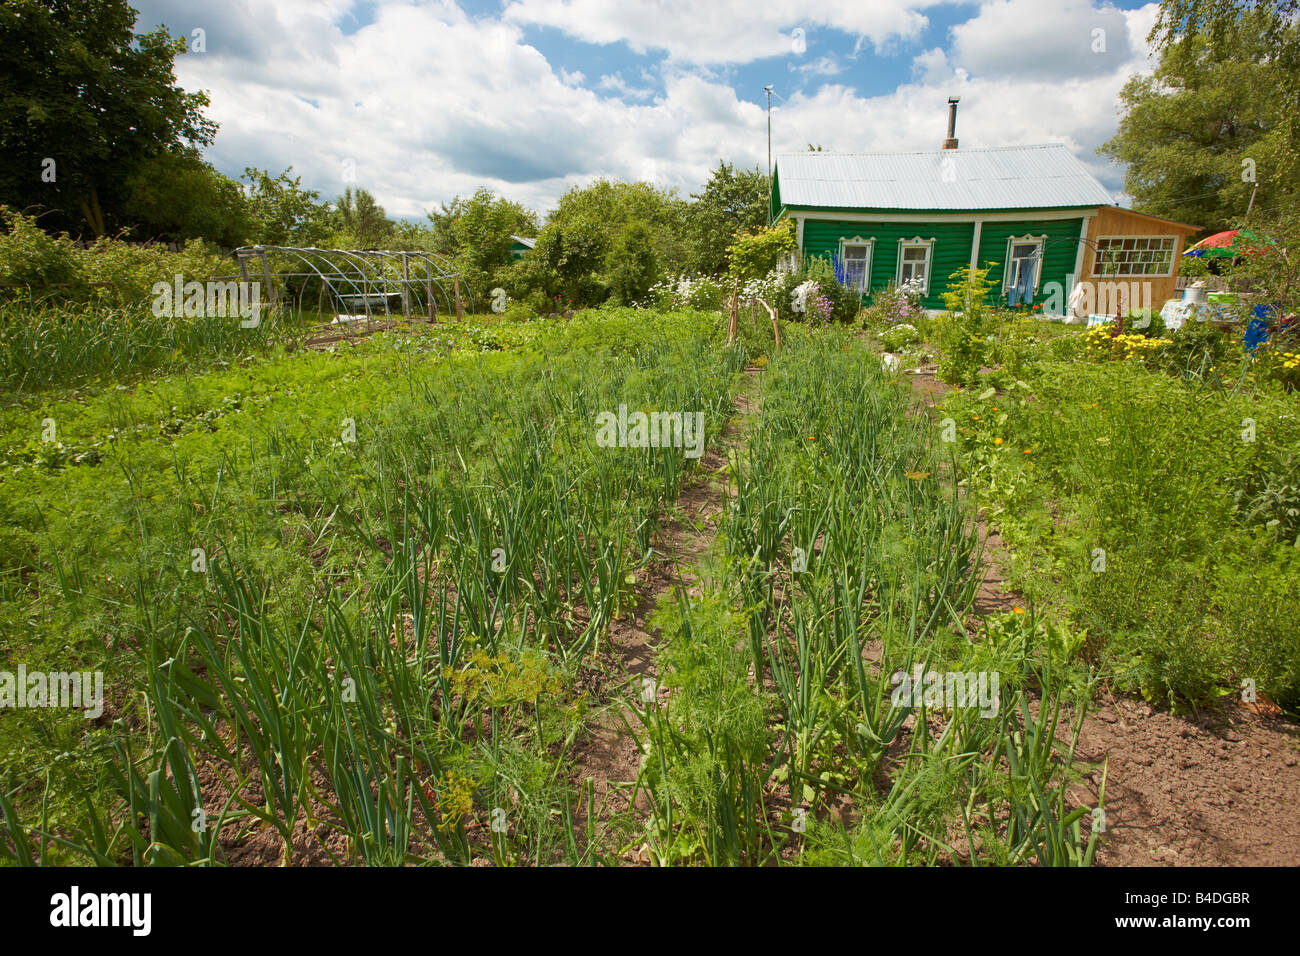 Vegetable garden at Russian dacha in summer. Kaluga region, Central Russia. Stock Photo